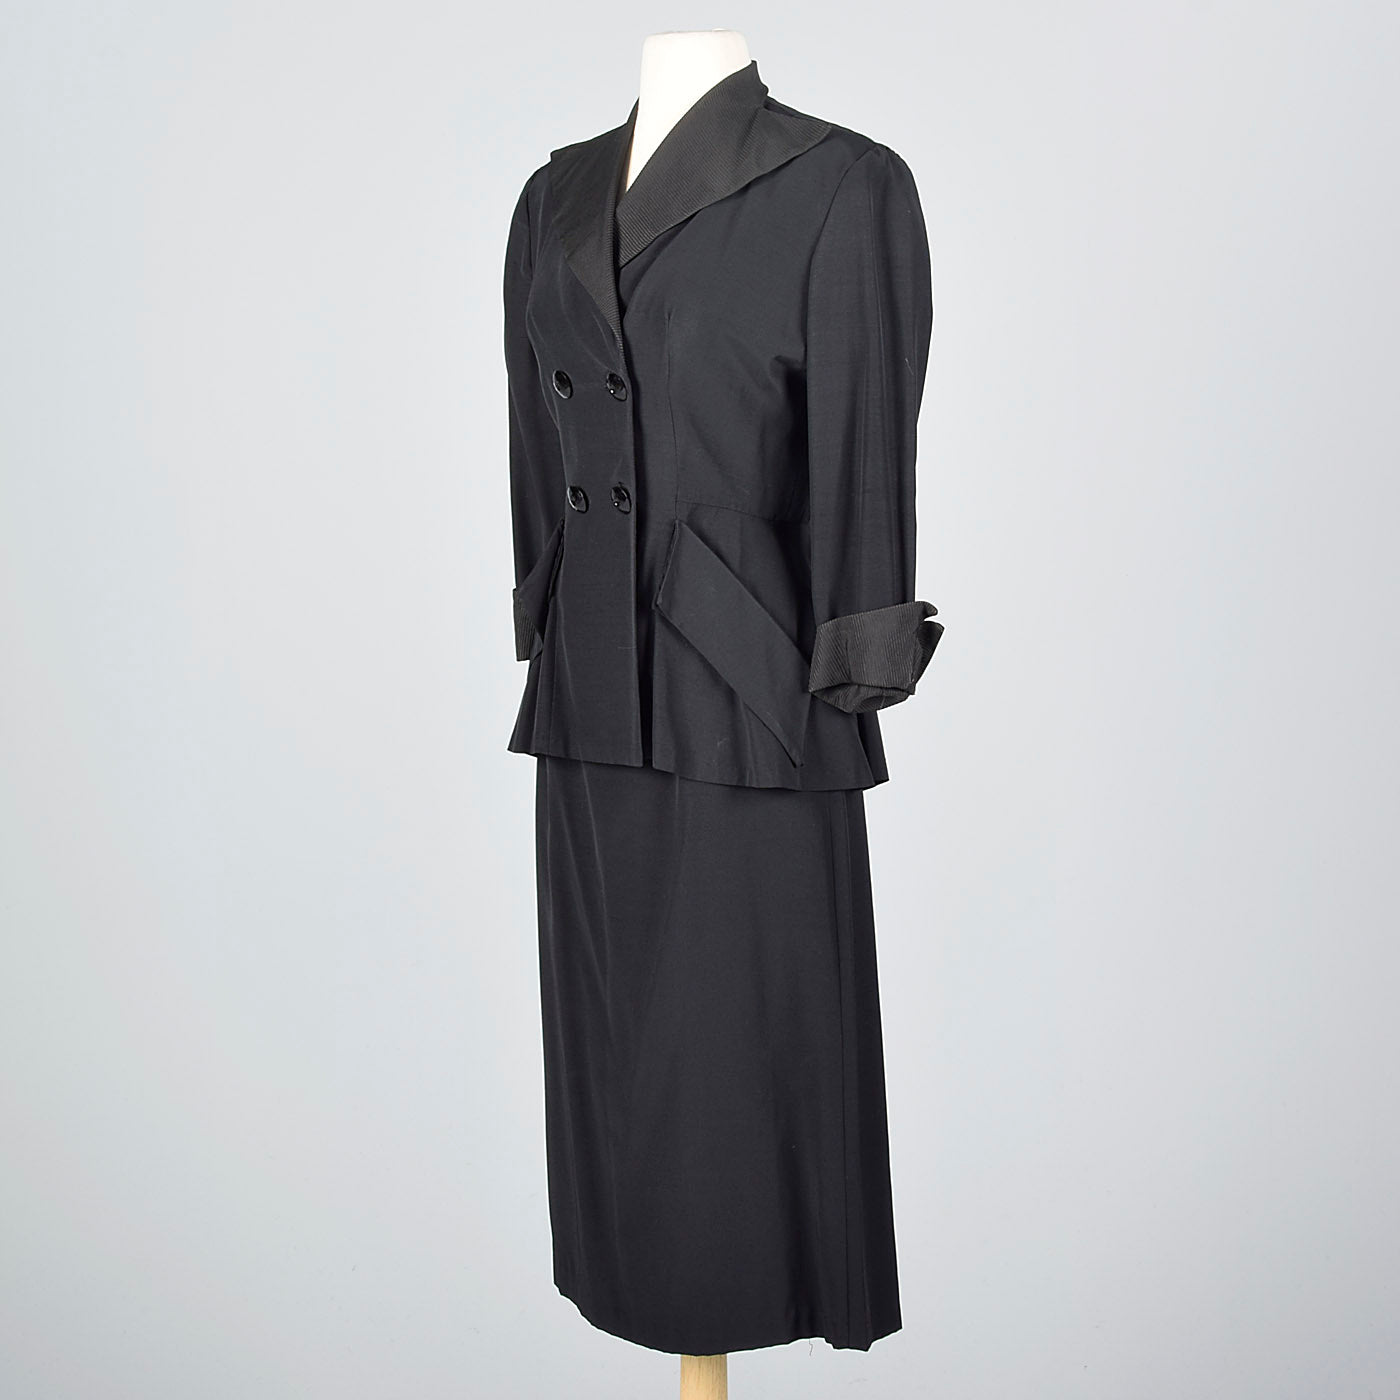 1940s Black Rayon Skirt Suit with Faille Trim